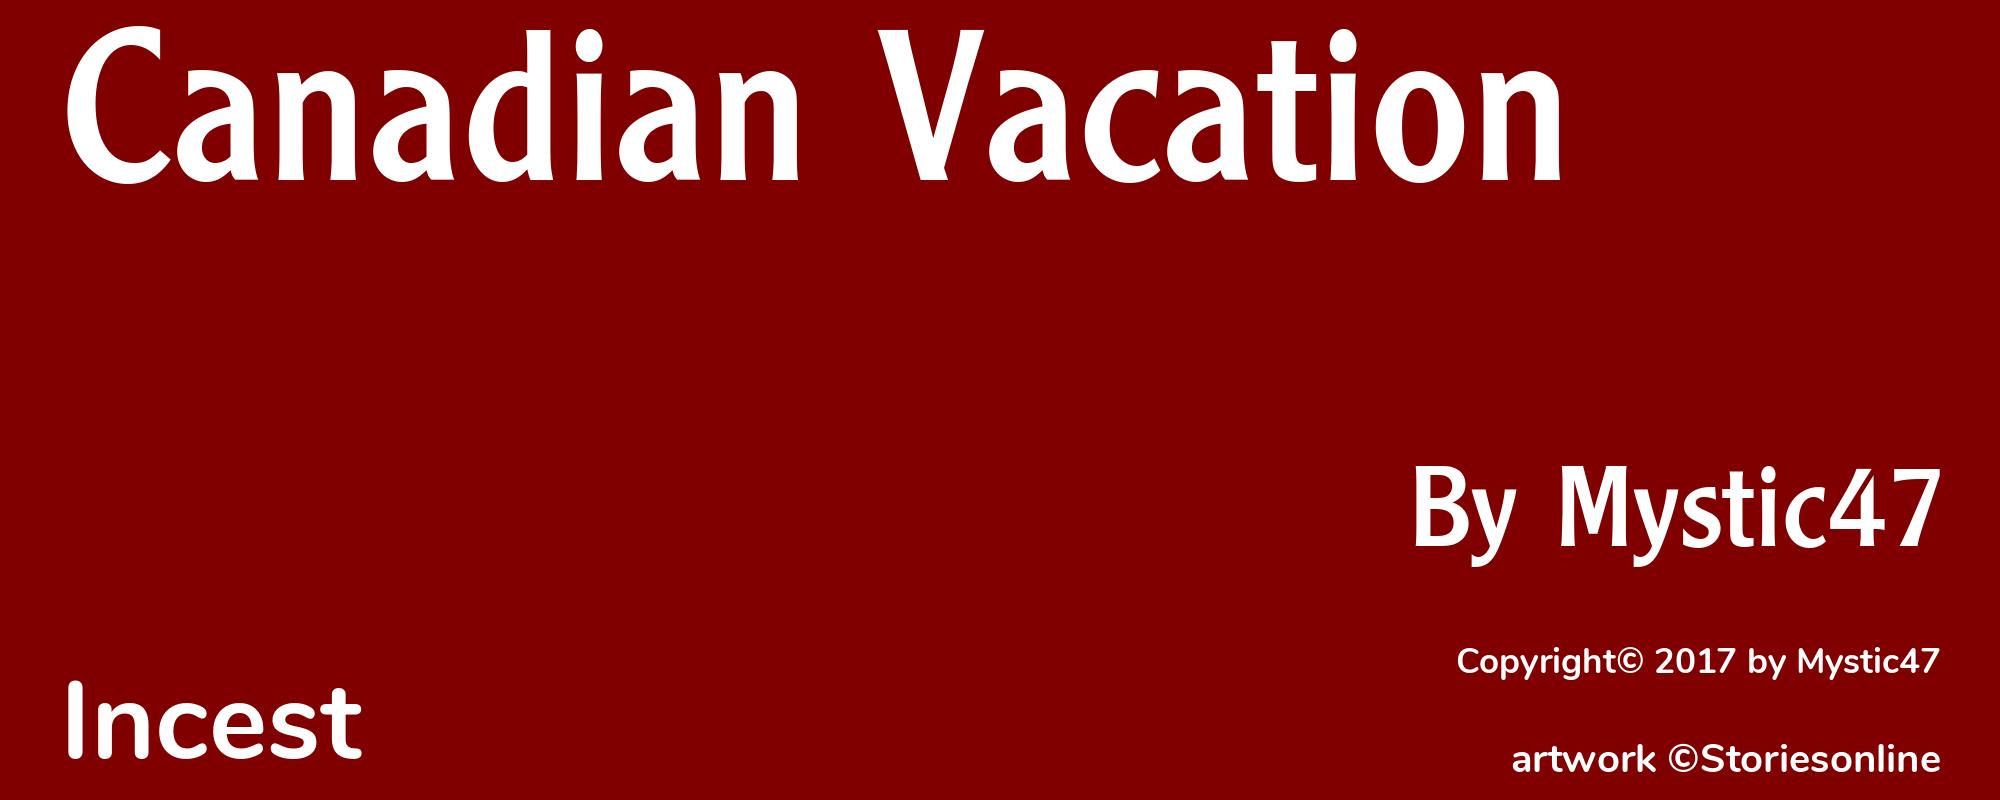 Canadian Vacation - Cover